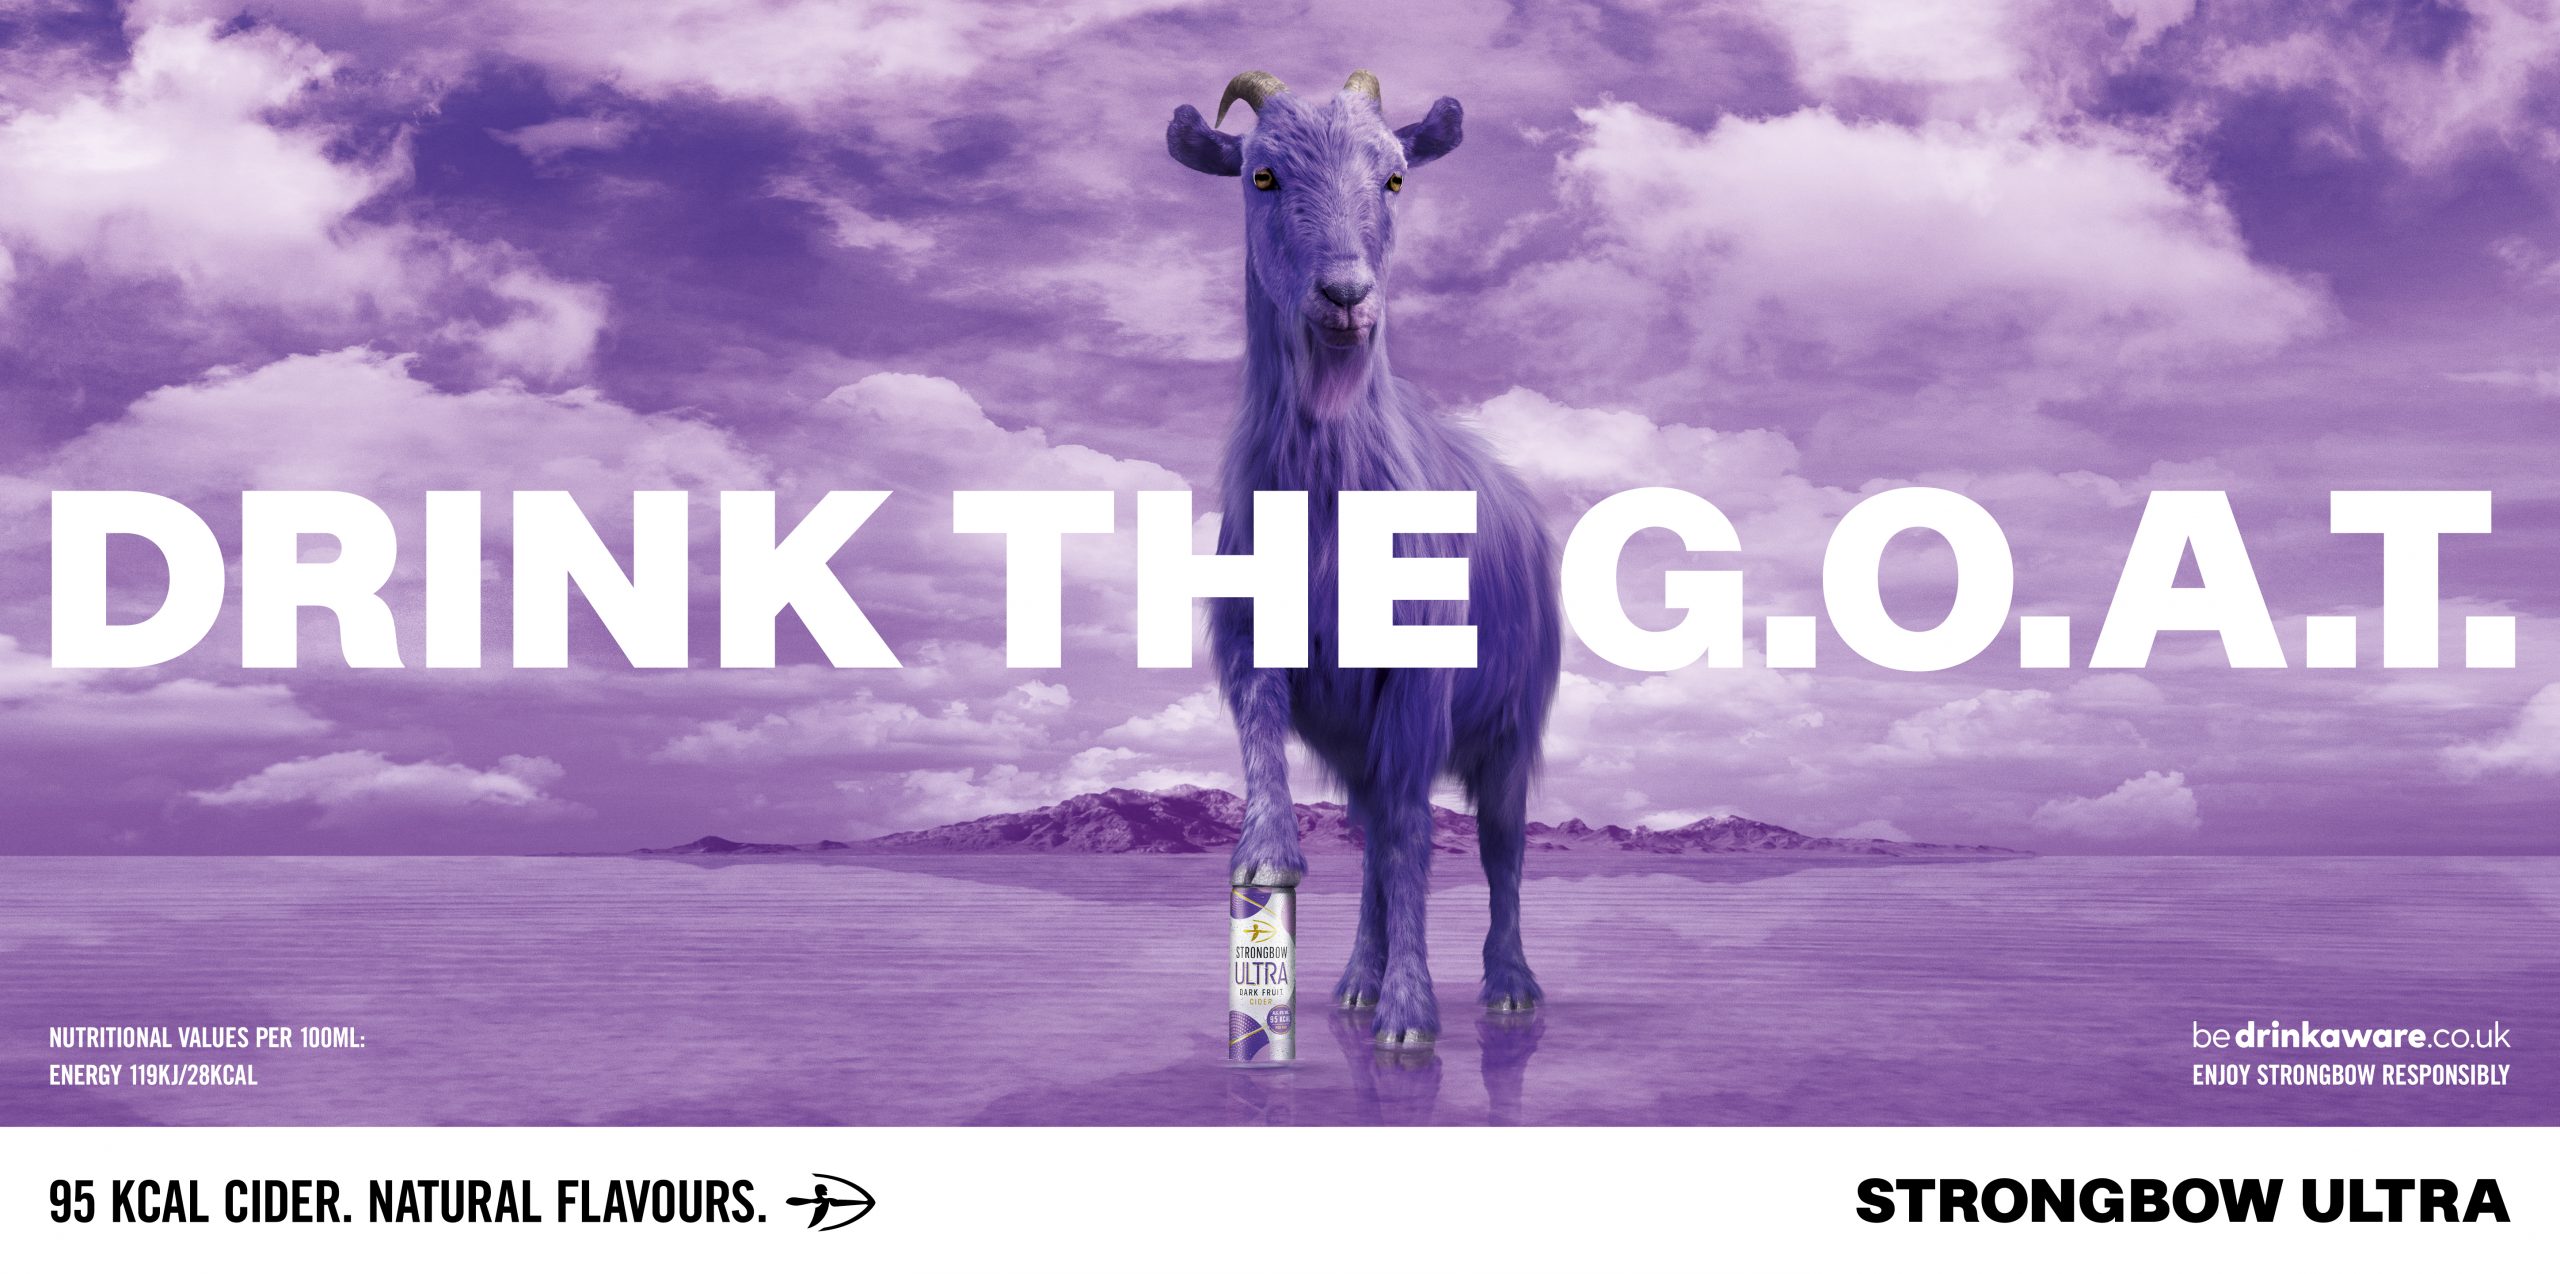 Strongbow ULTRA Dark Fruit campaign encourages people to drink the G.O.A.T.